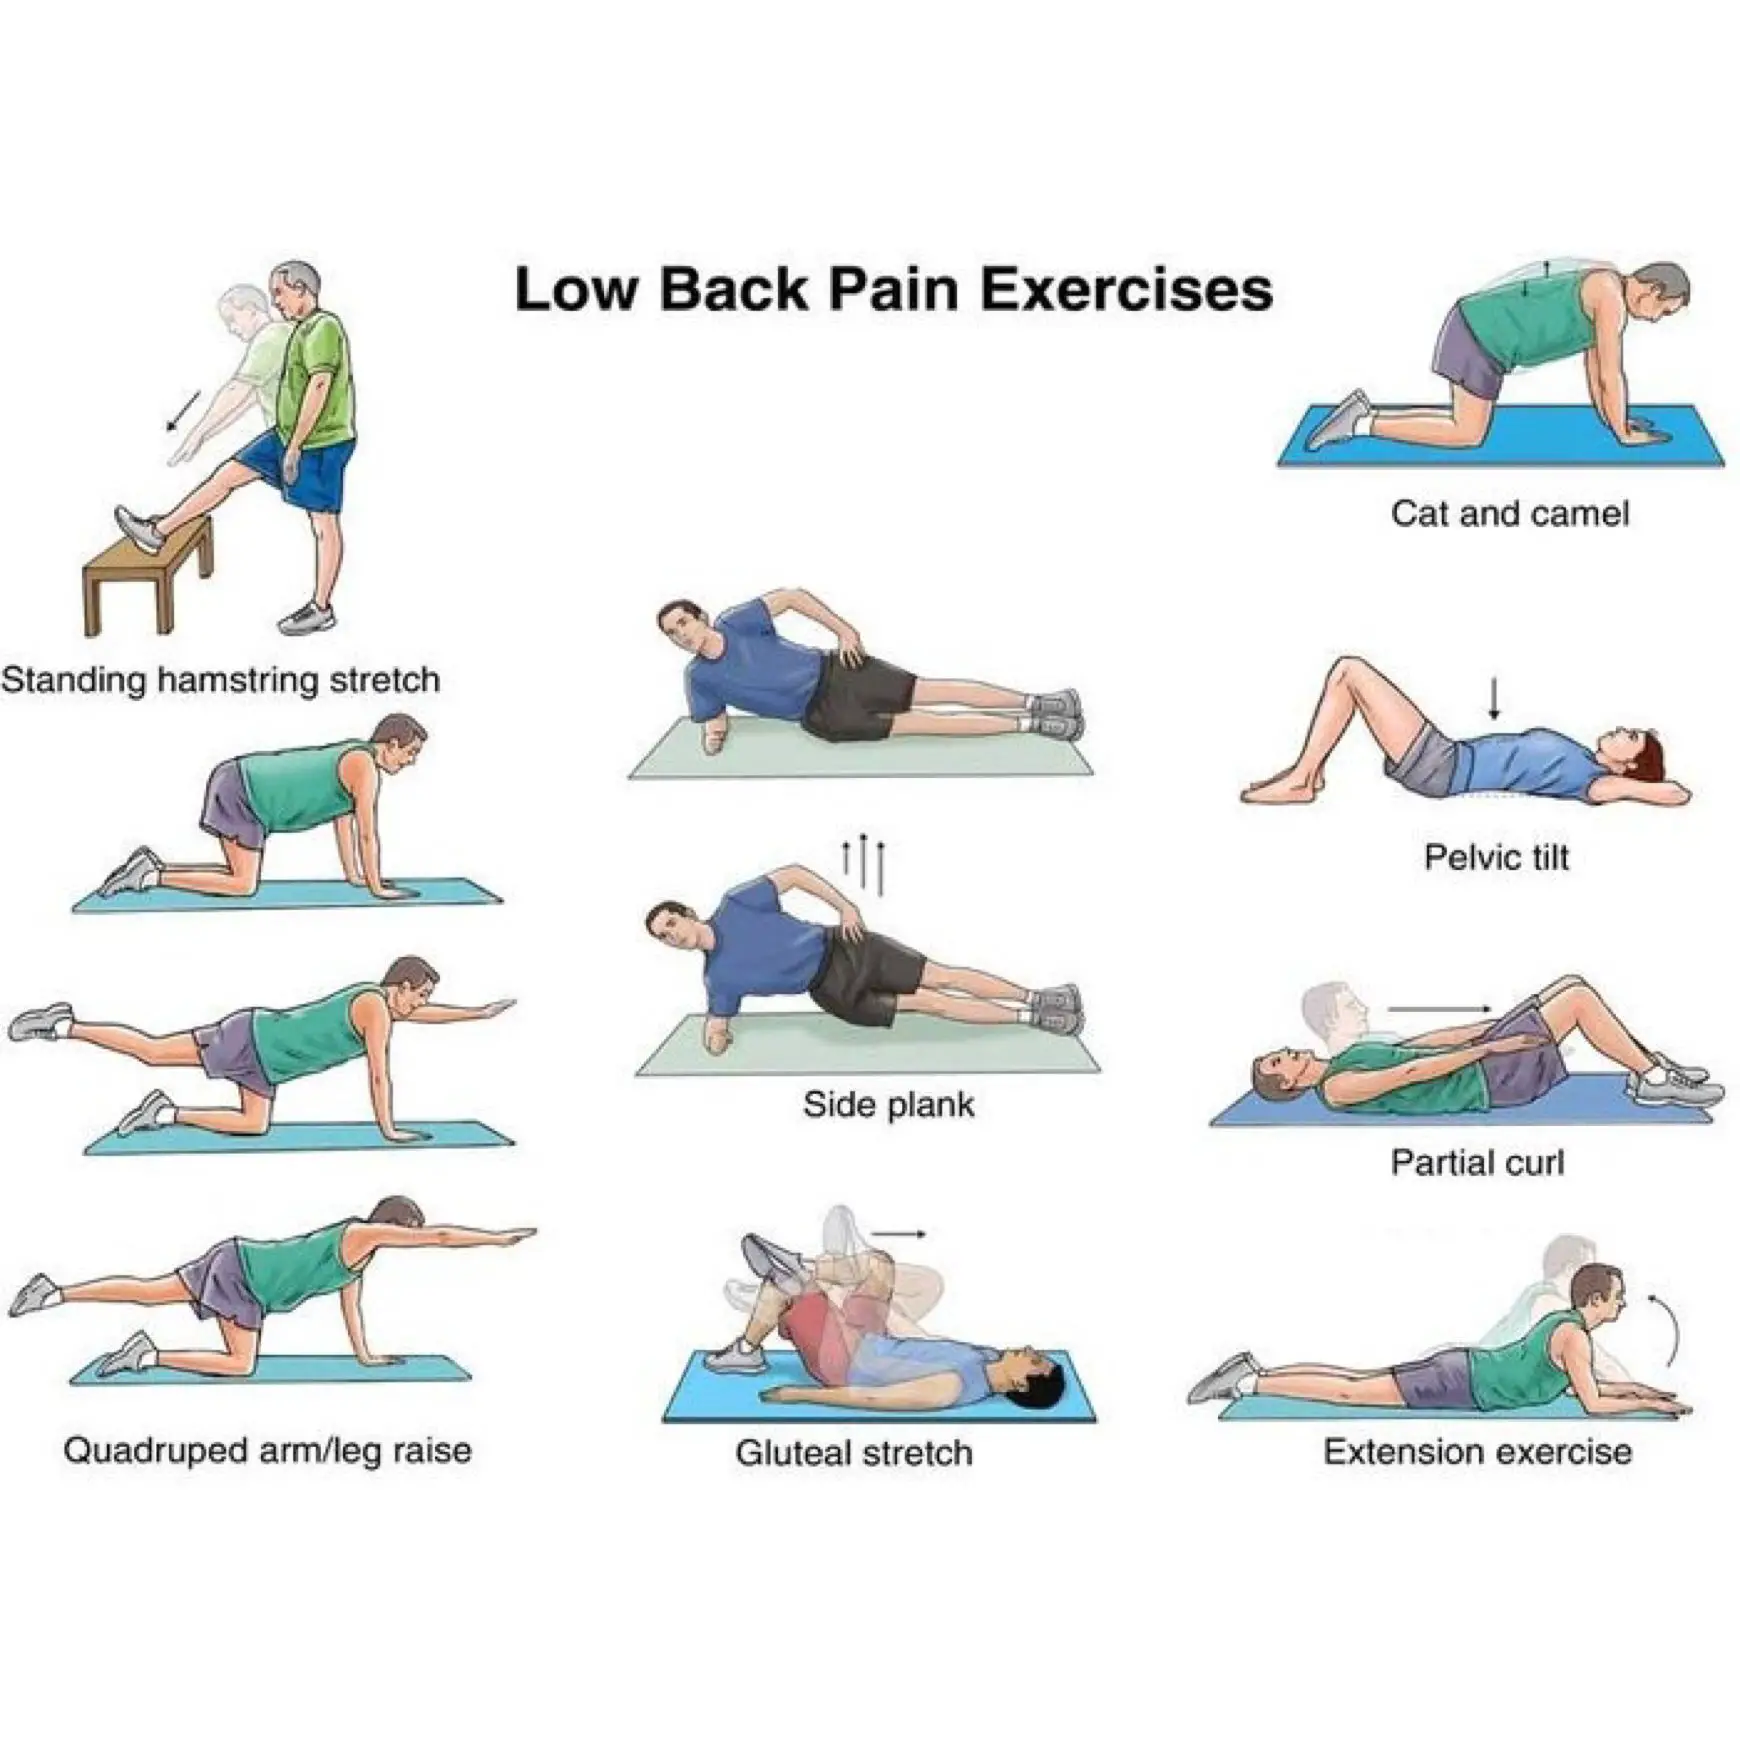 What Can I Do To Relieve My Lower Back Pain